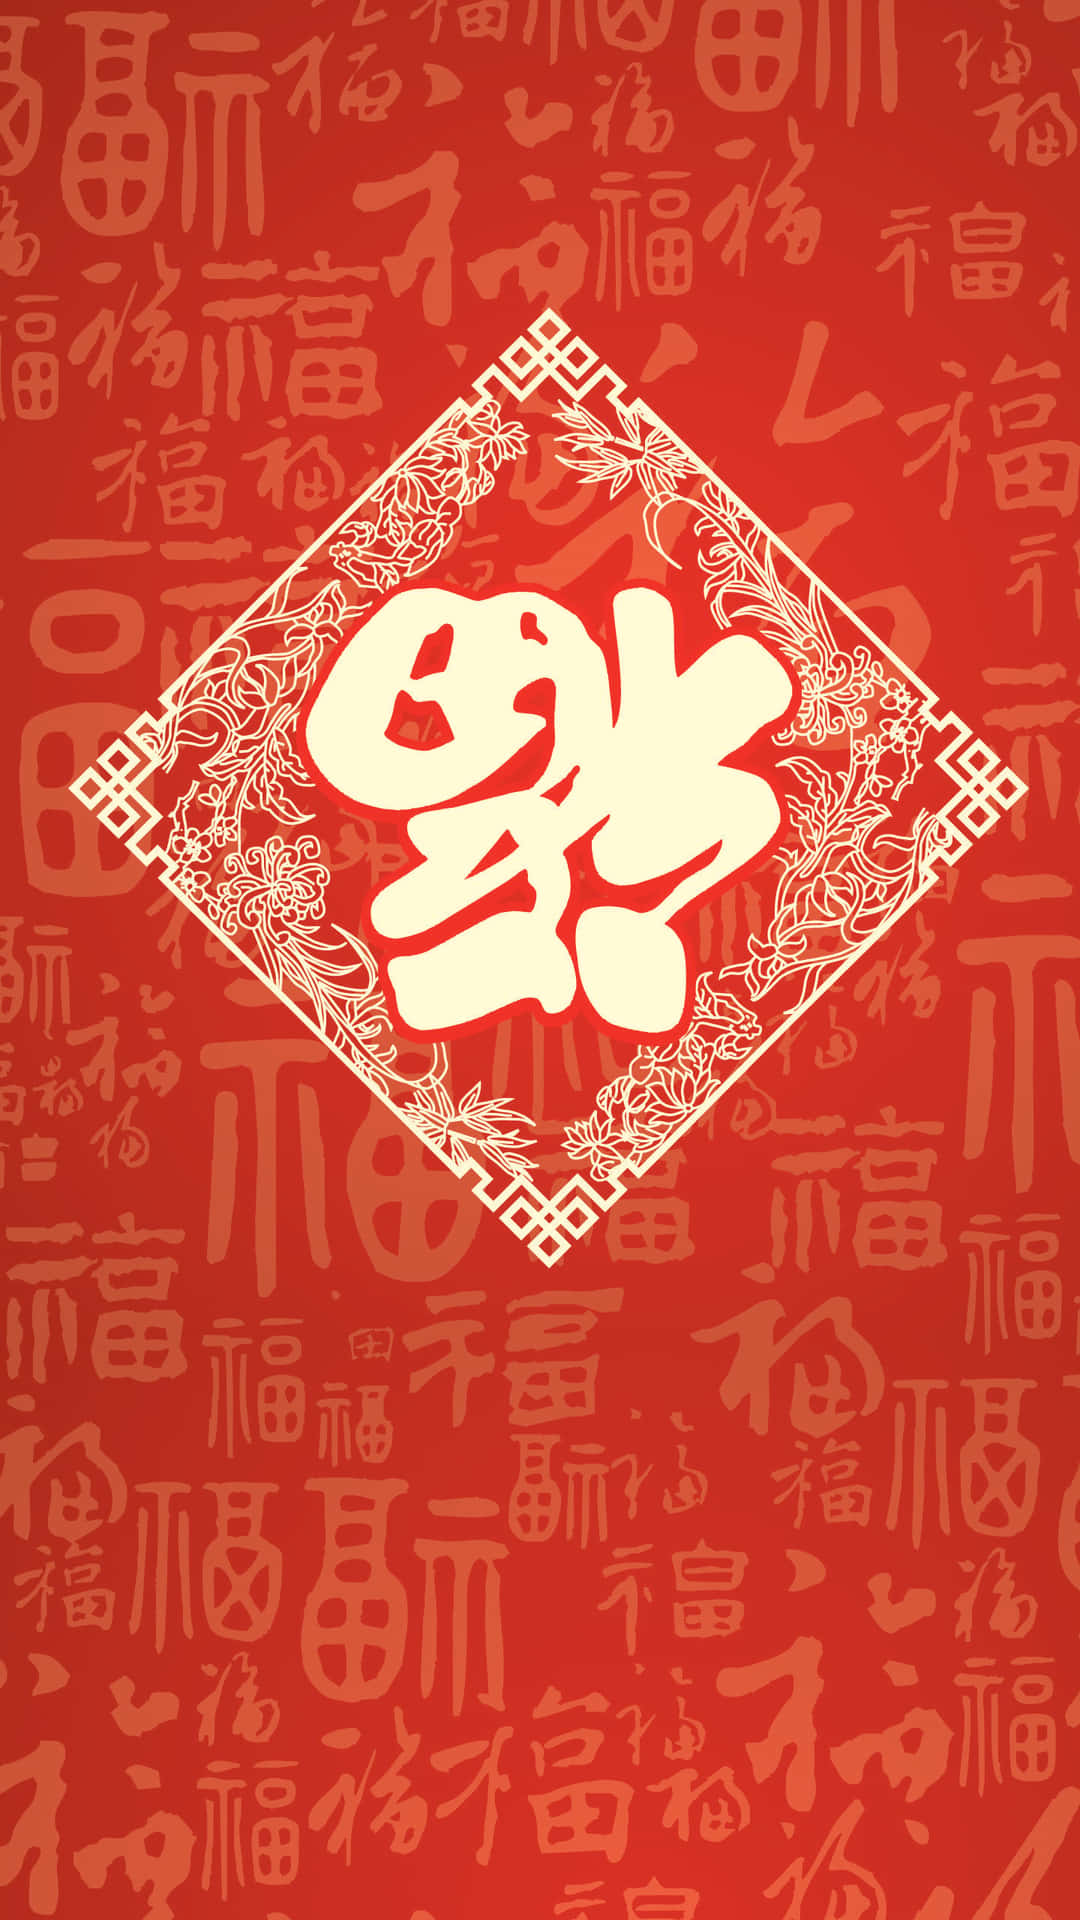 Celebrate Chinese New Year With an Iphone Wallpaper